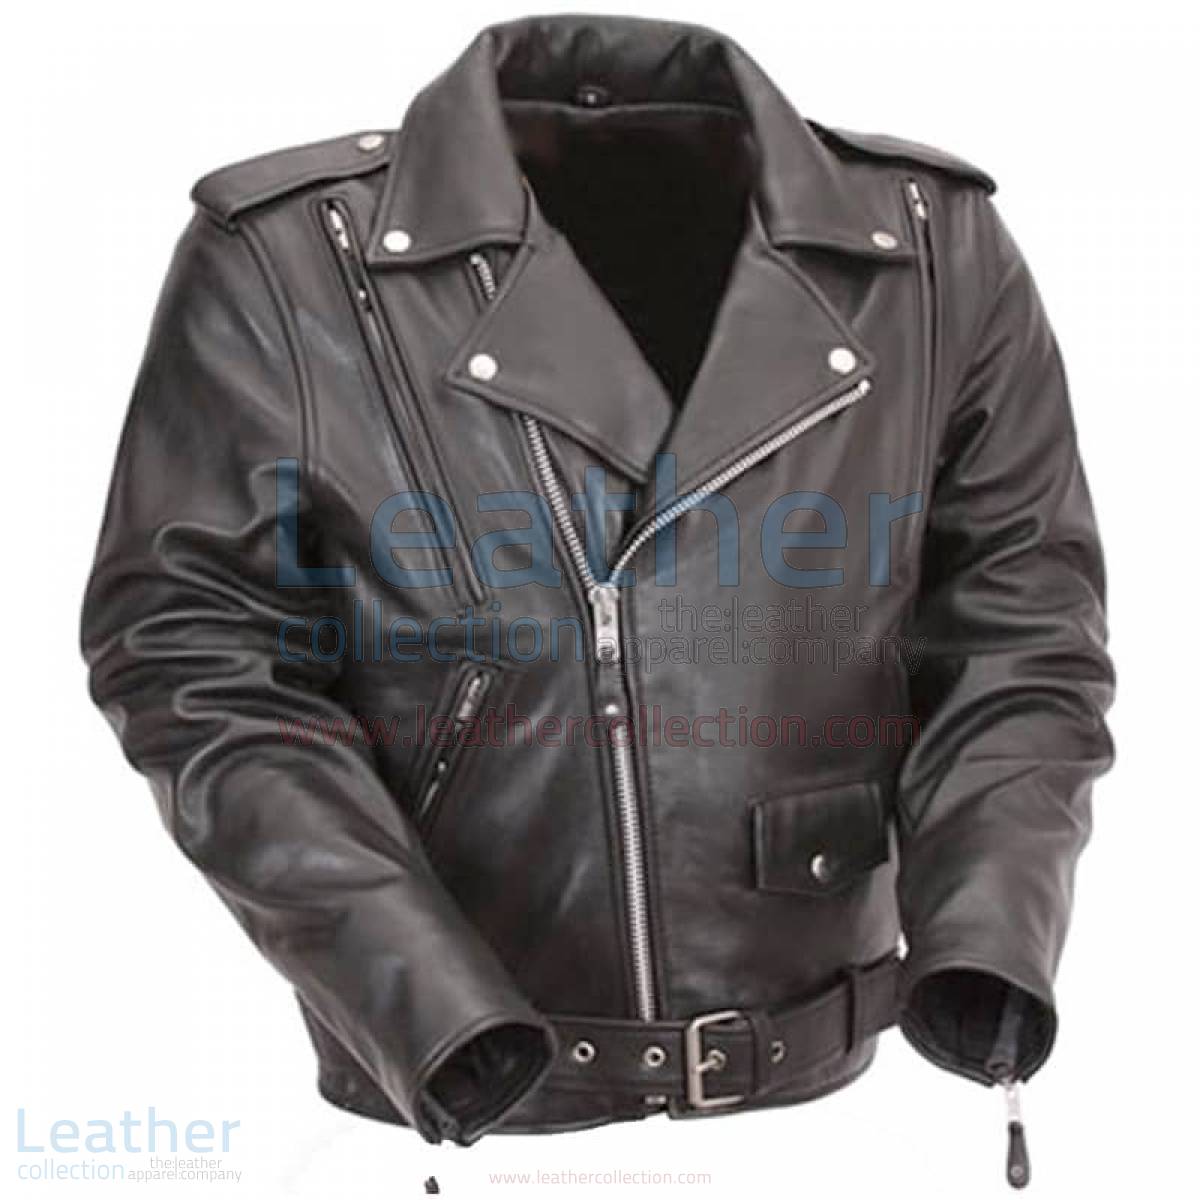 Black Leather Motorcycle Jacket with Exclusive Built-in Back Support